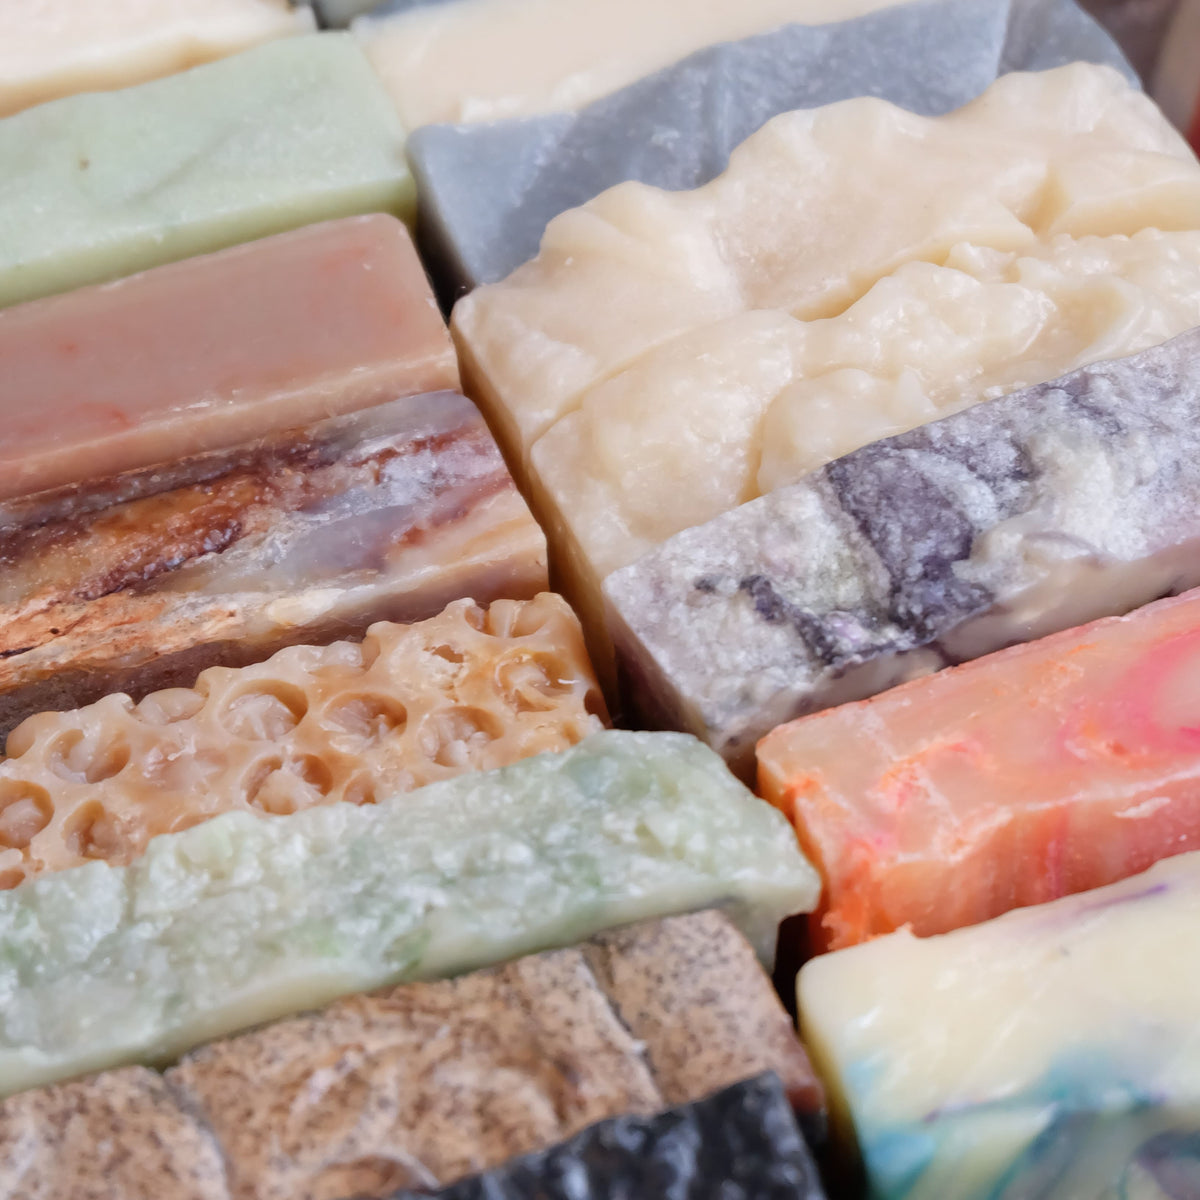 Are There Benefits of Having Essential Oils in Soap?